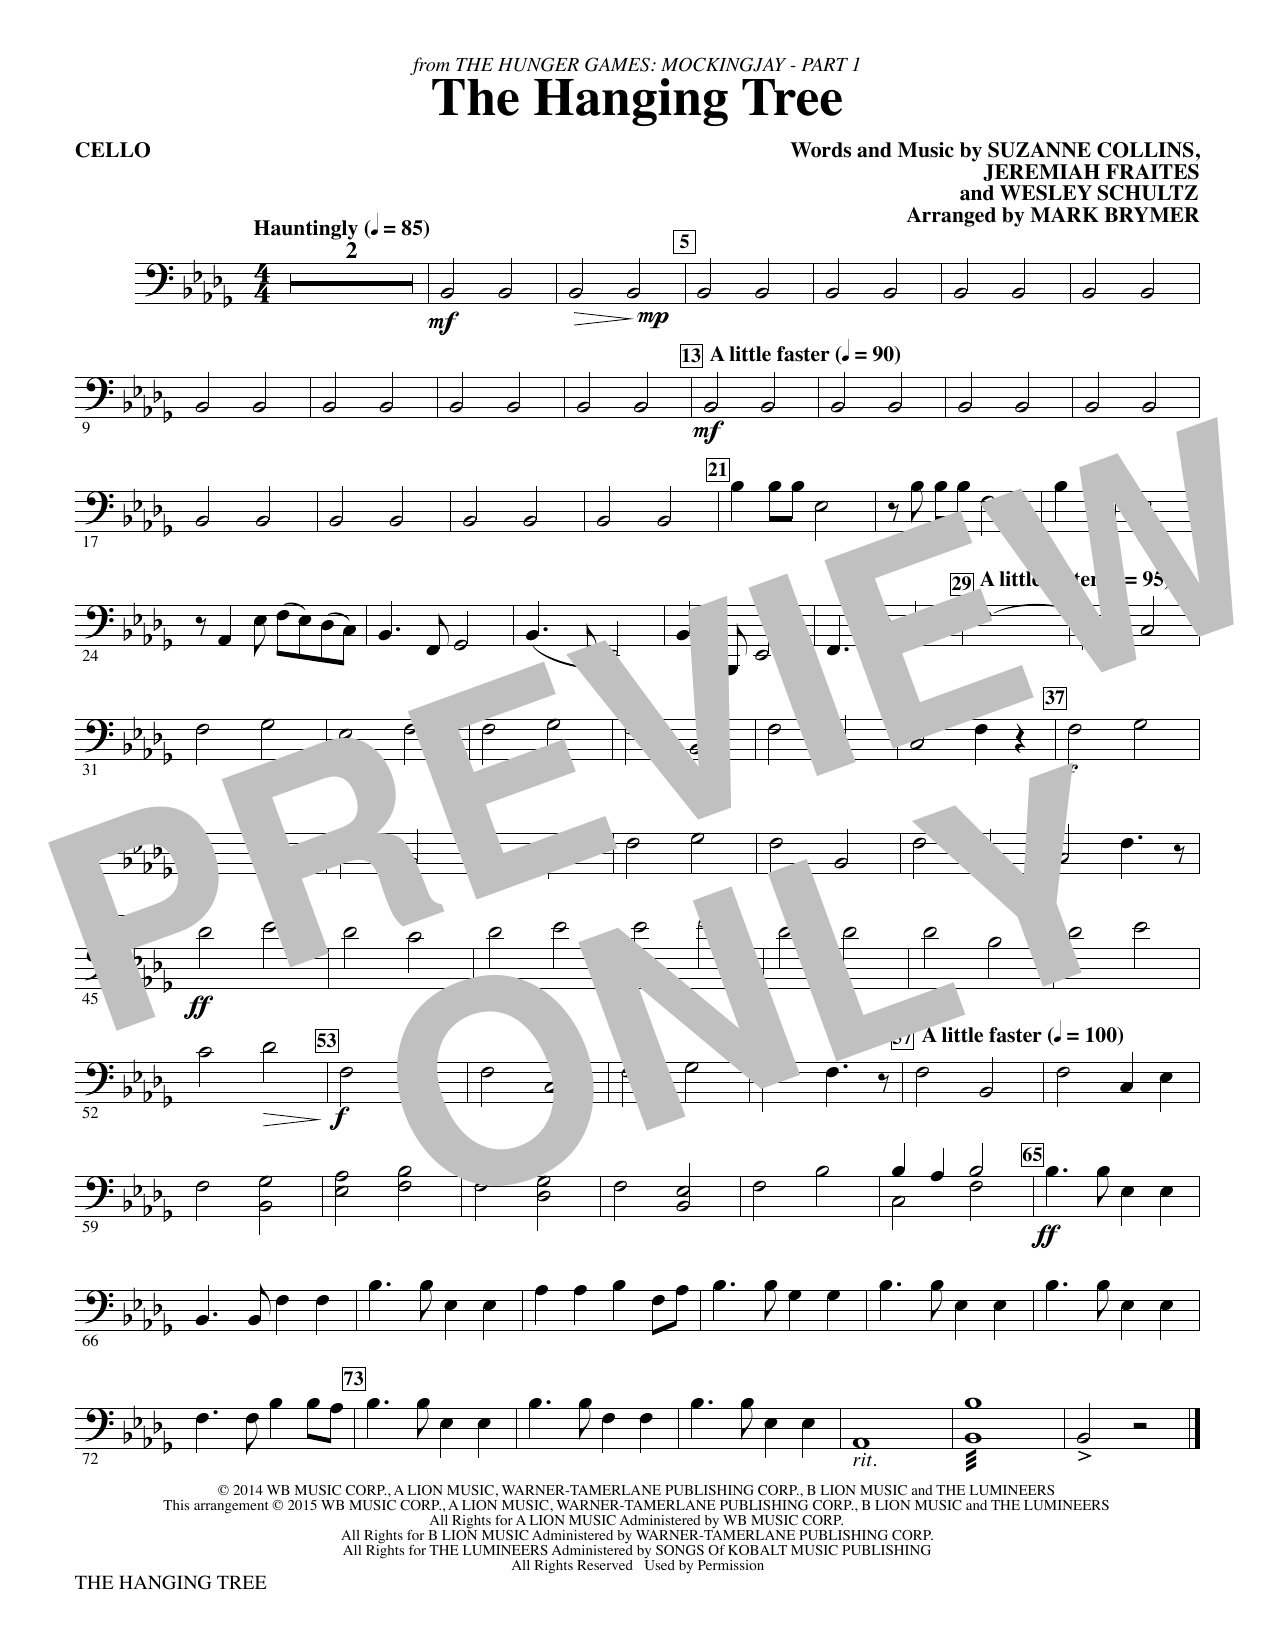 Mark Brymer The Hanging Tree (from The Hunger Games: Mockingjay Part I) - Cello sheet music notes and chords. Download Printable PDF.